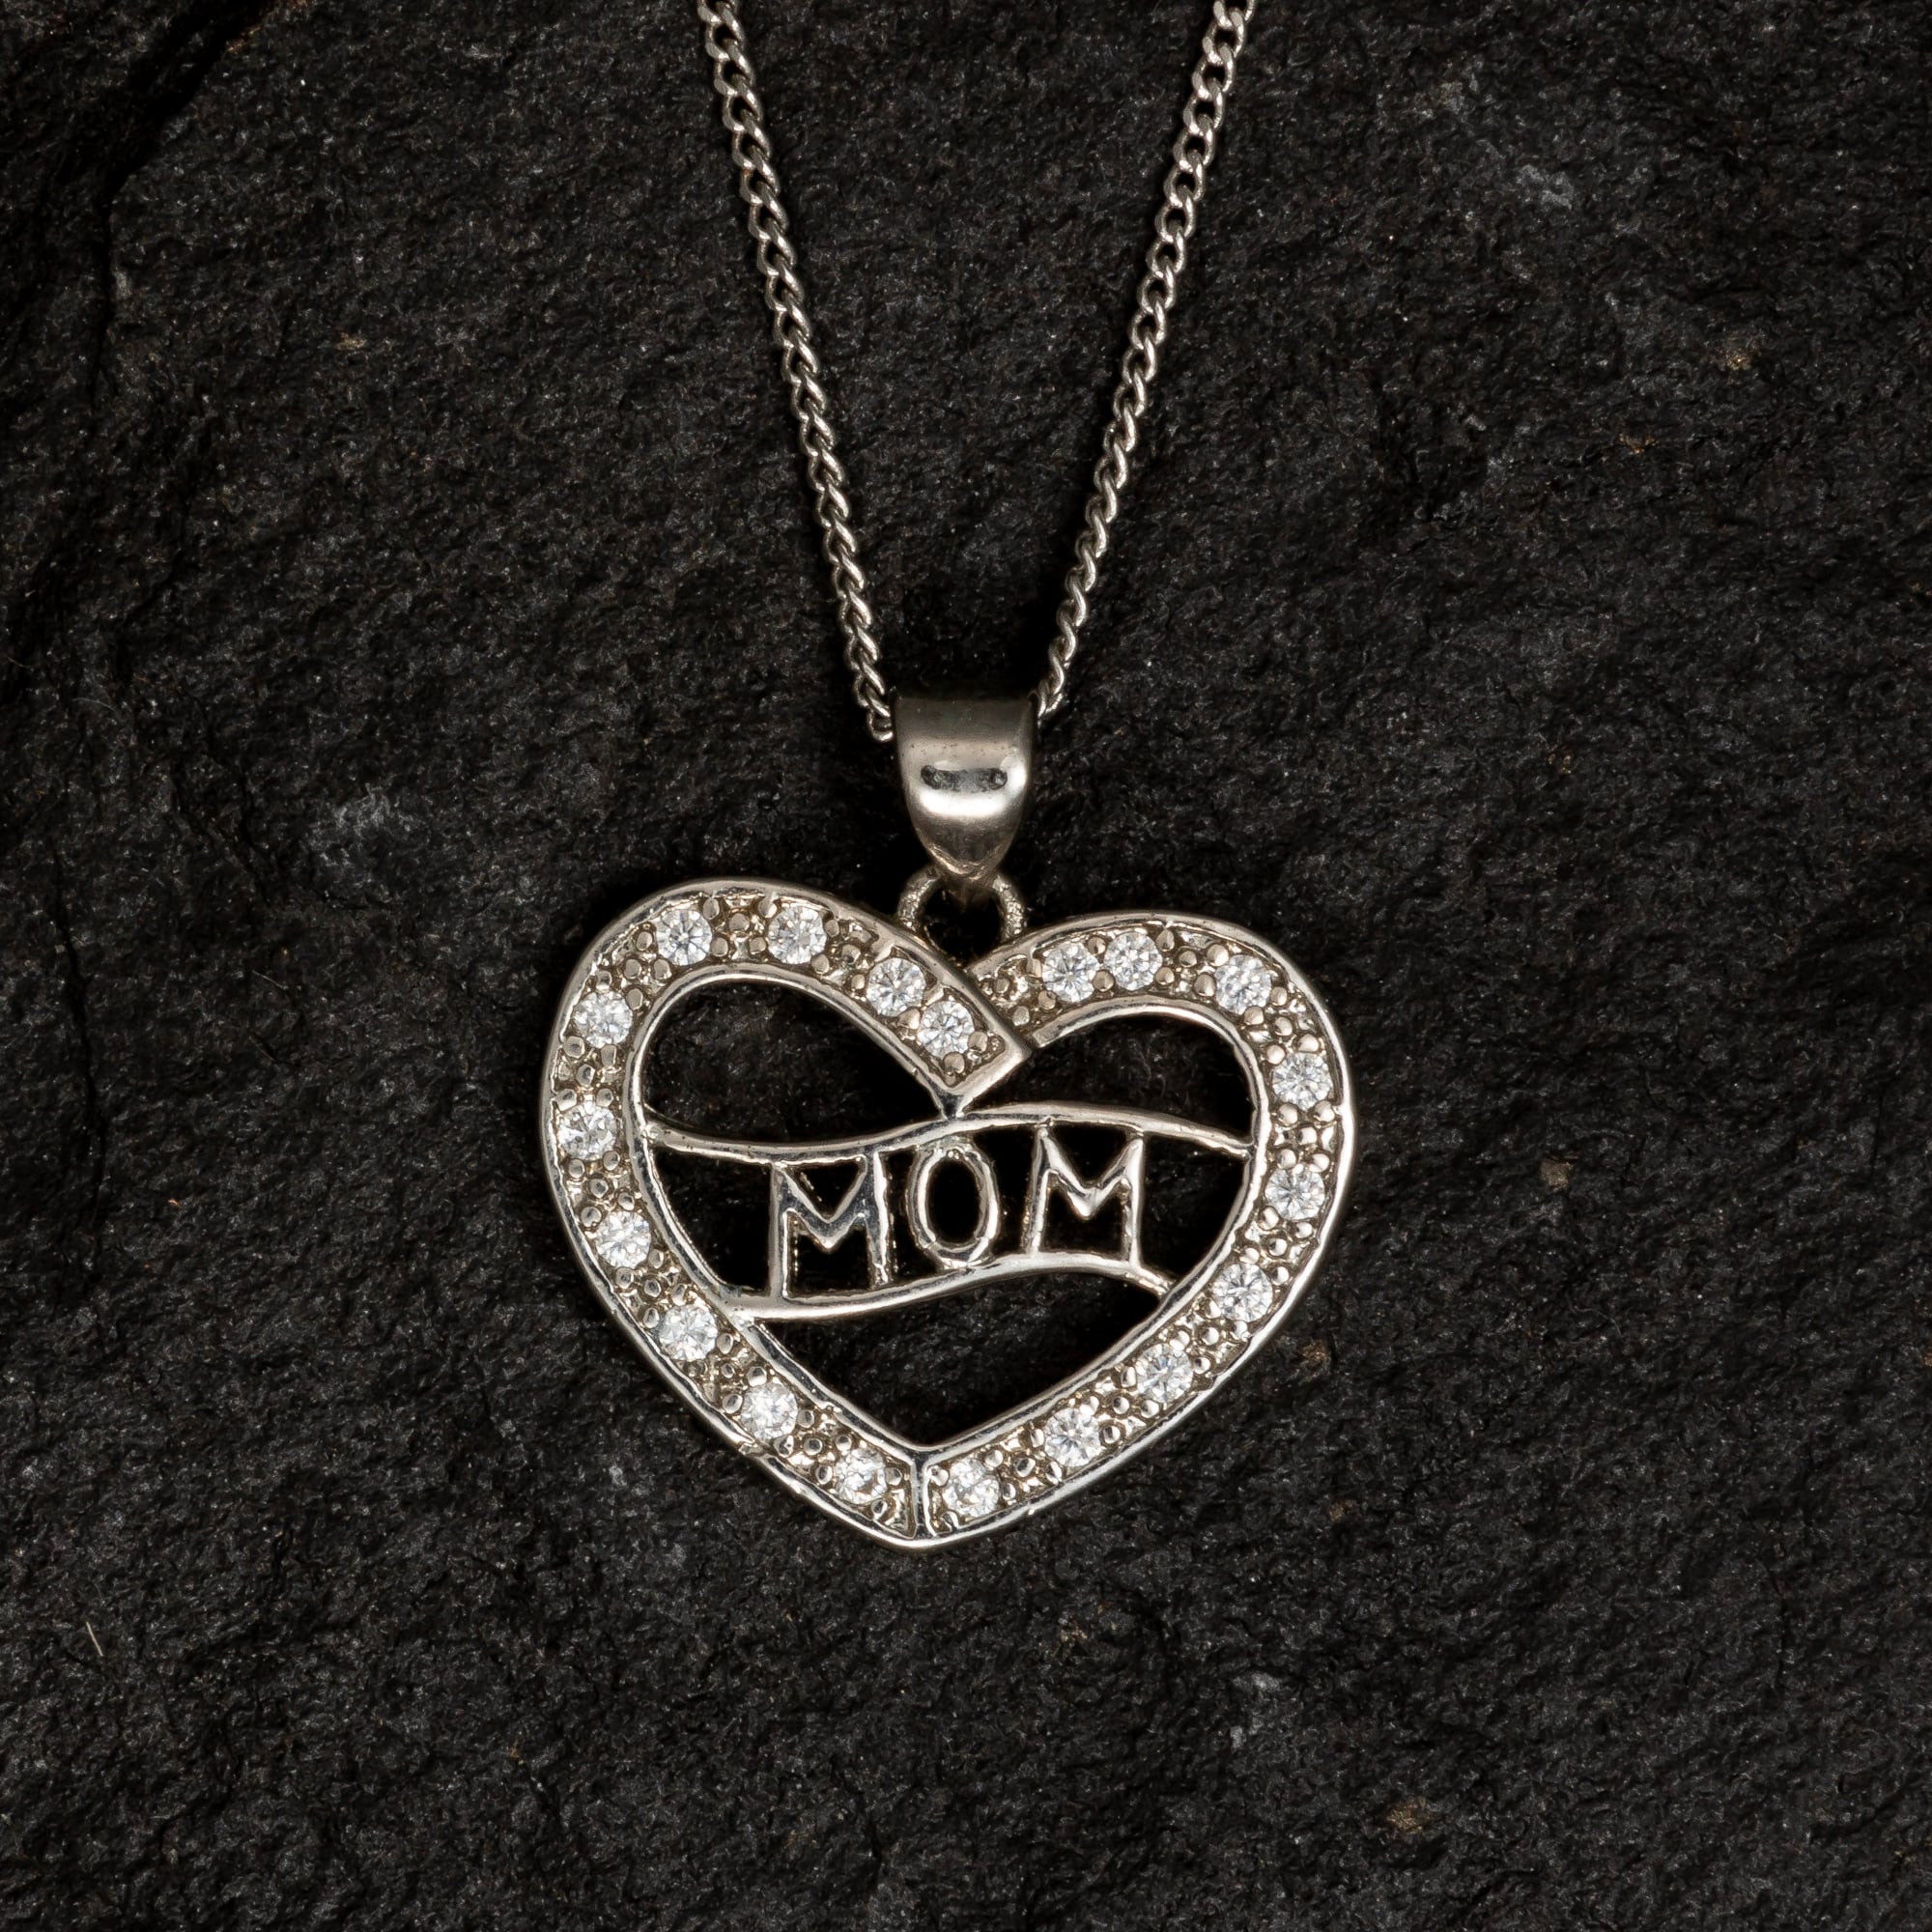 Love Mom Heart Necklace with Gemstones - Necklaces